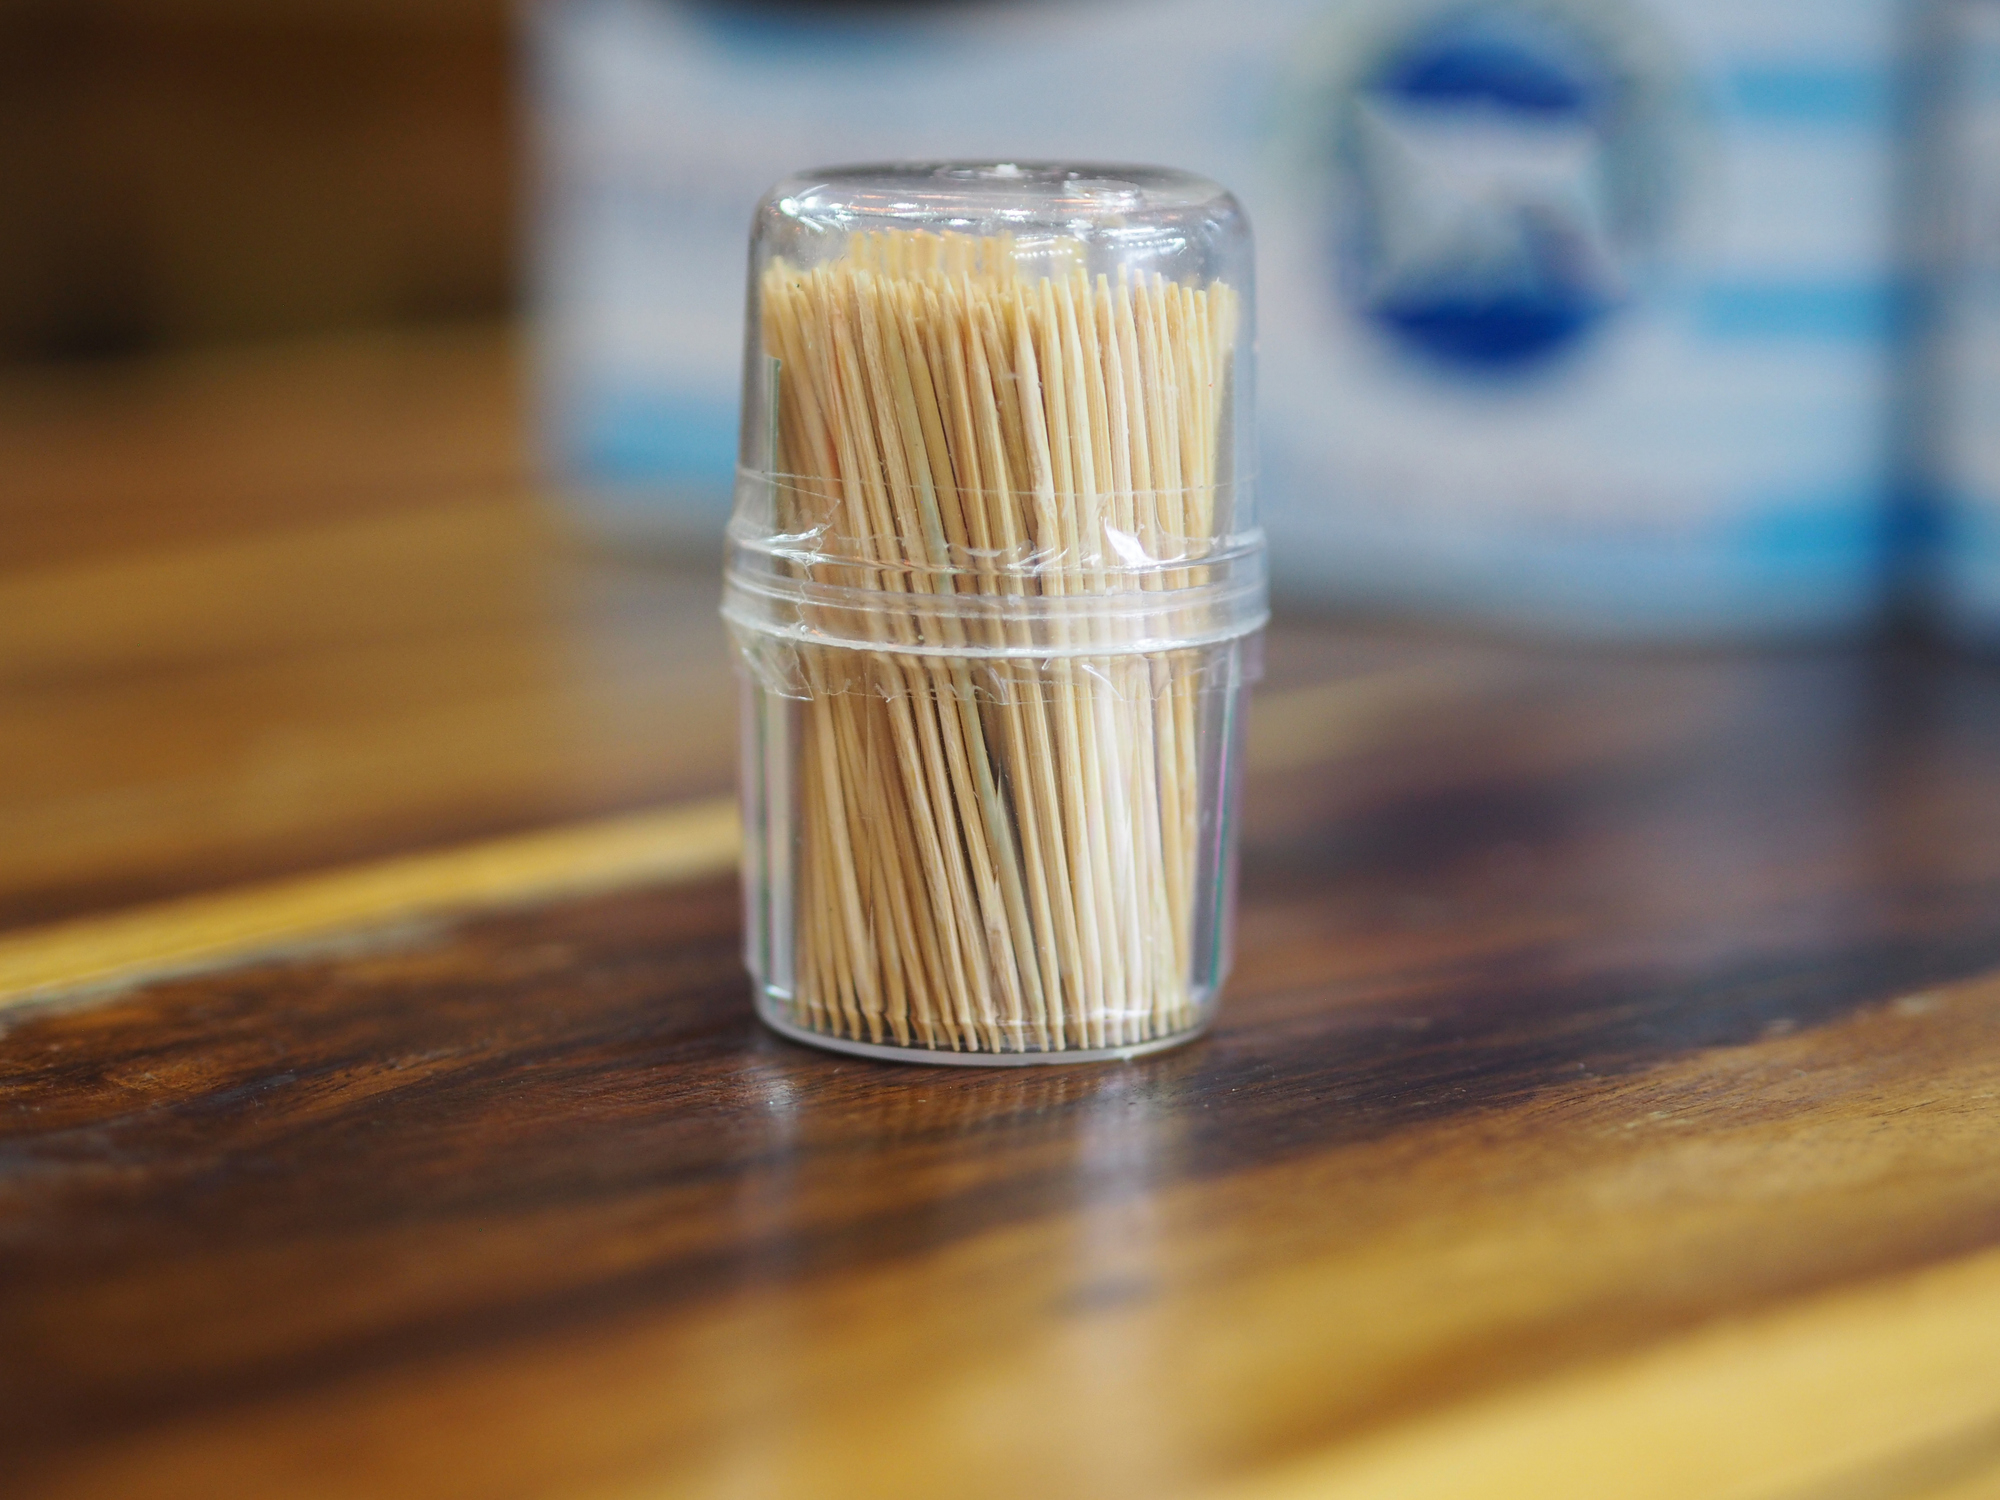 Container of toothpicks on a wooden table